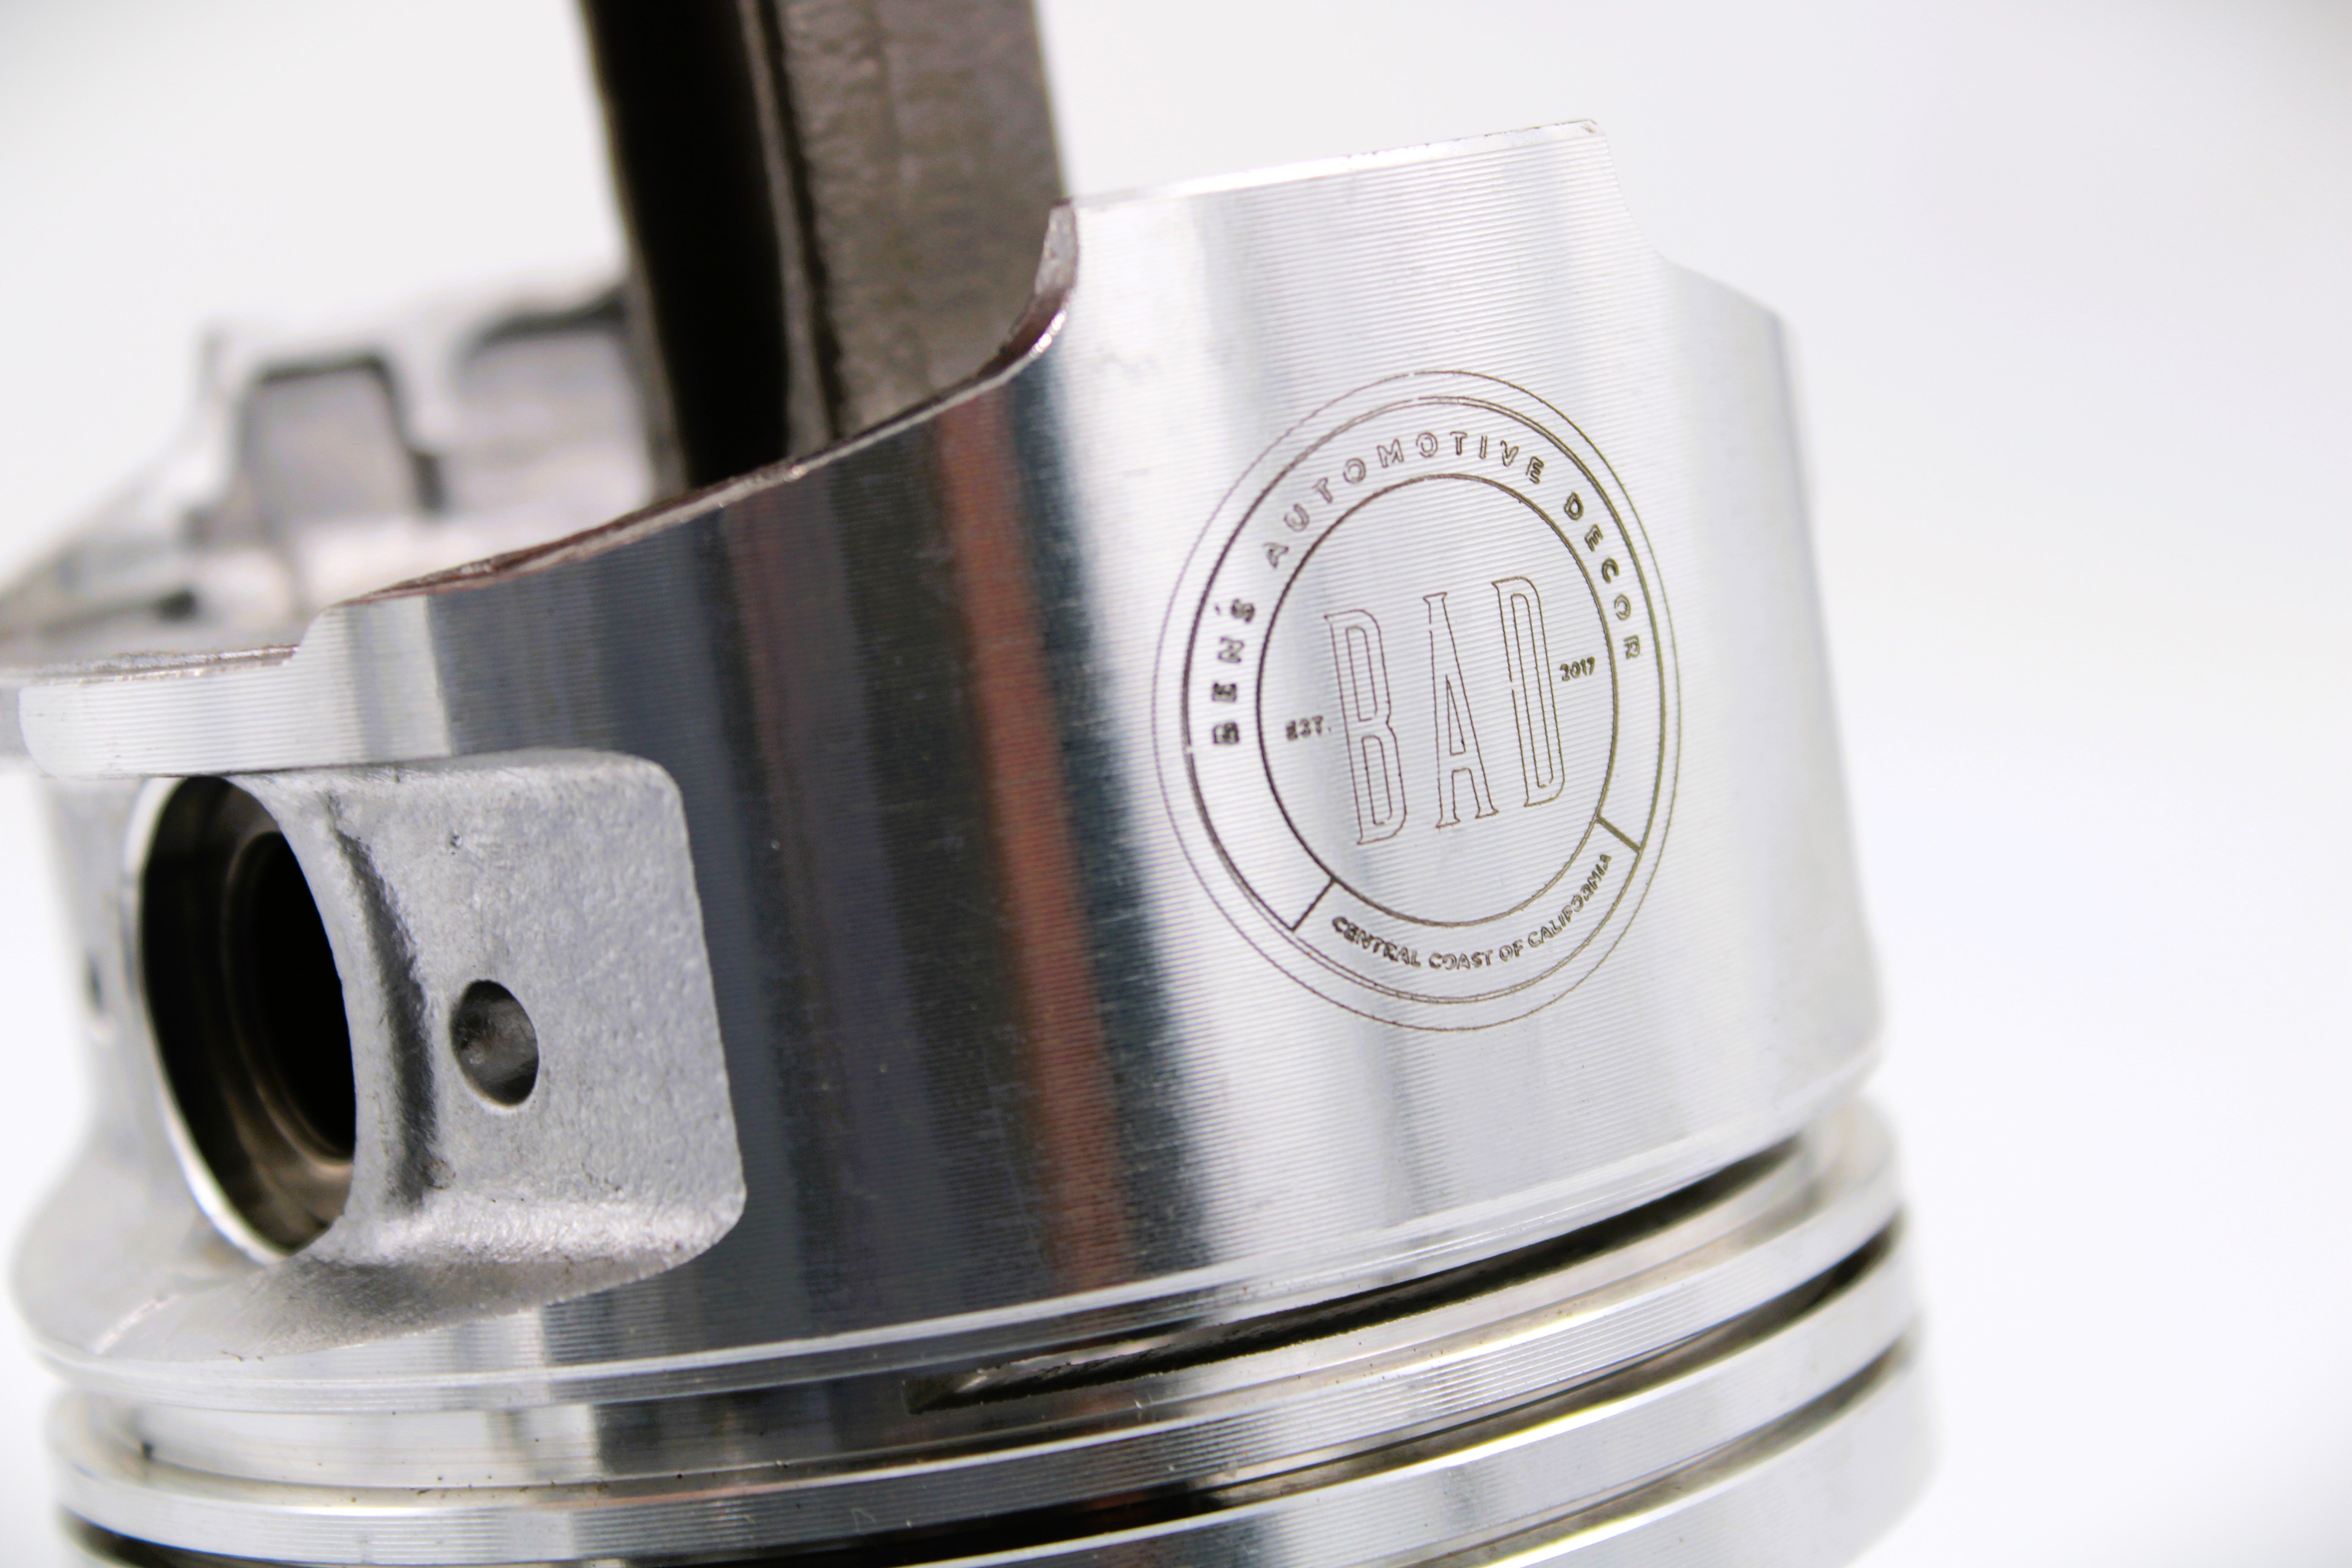 Close-up view of the base of a polished car piston clock, engraved with the Ben's Automotive Decor logo.